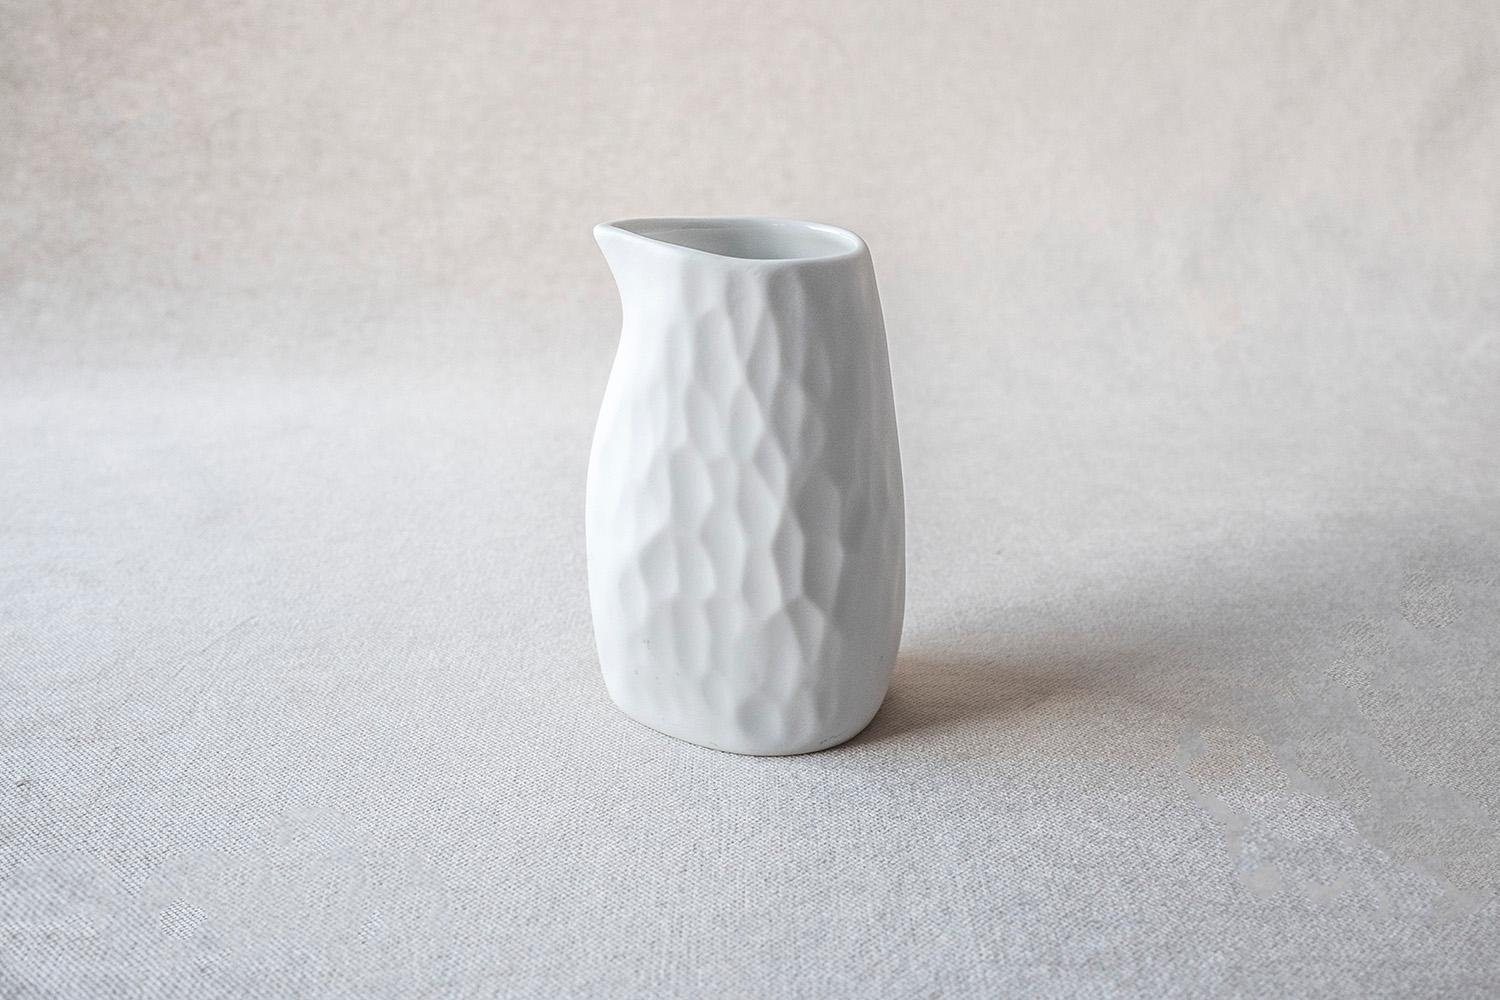 • Beautiful creamer 
• Measures: 10 cm high x 5 cm diameter
• Perfect to hold and pour olive oil, sauces and creams
• Unglazed outside with an organically carved texture
• Glazed white on the inside
• Designed in Amsterdam / handmade in